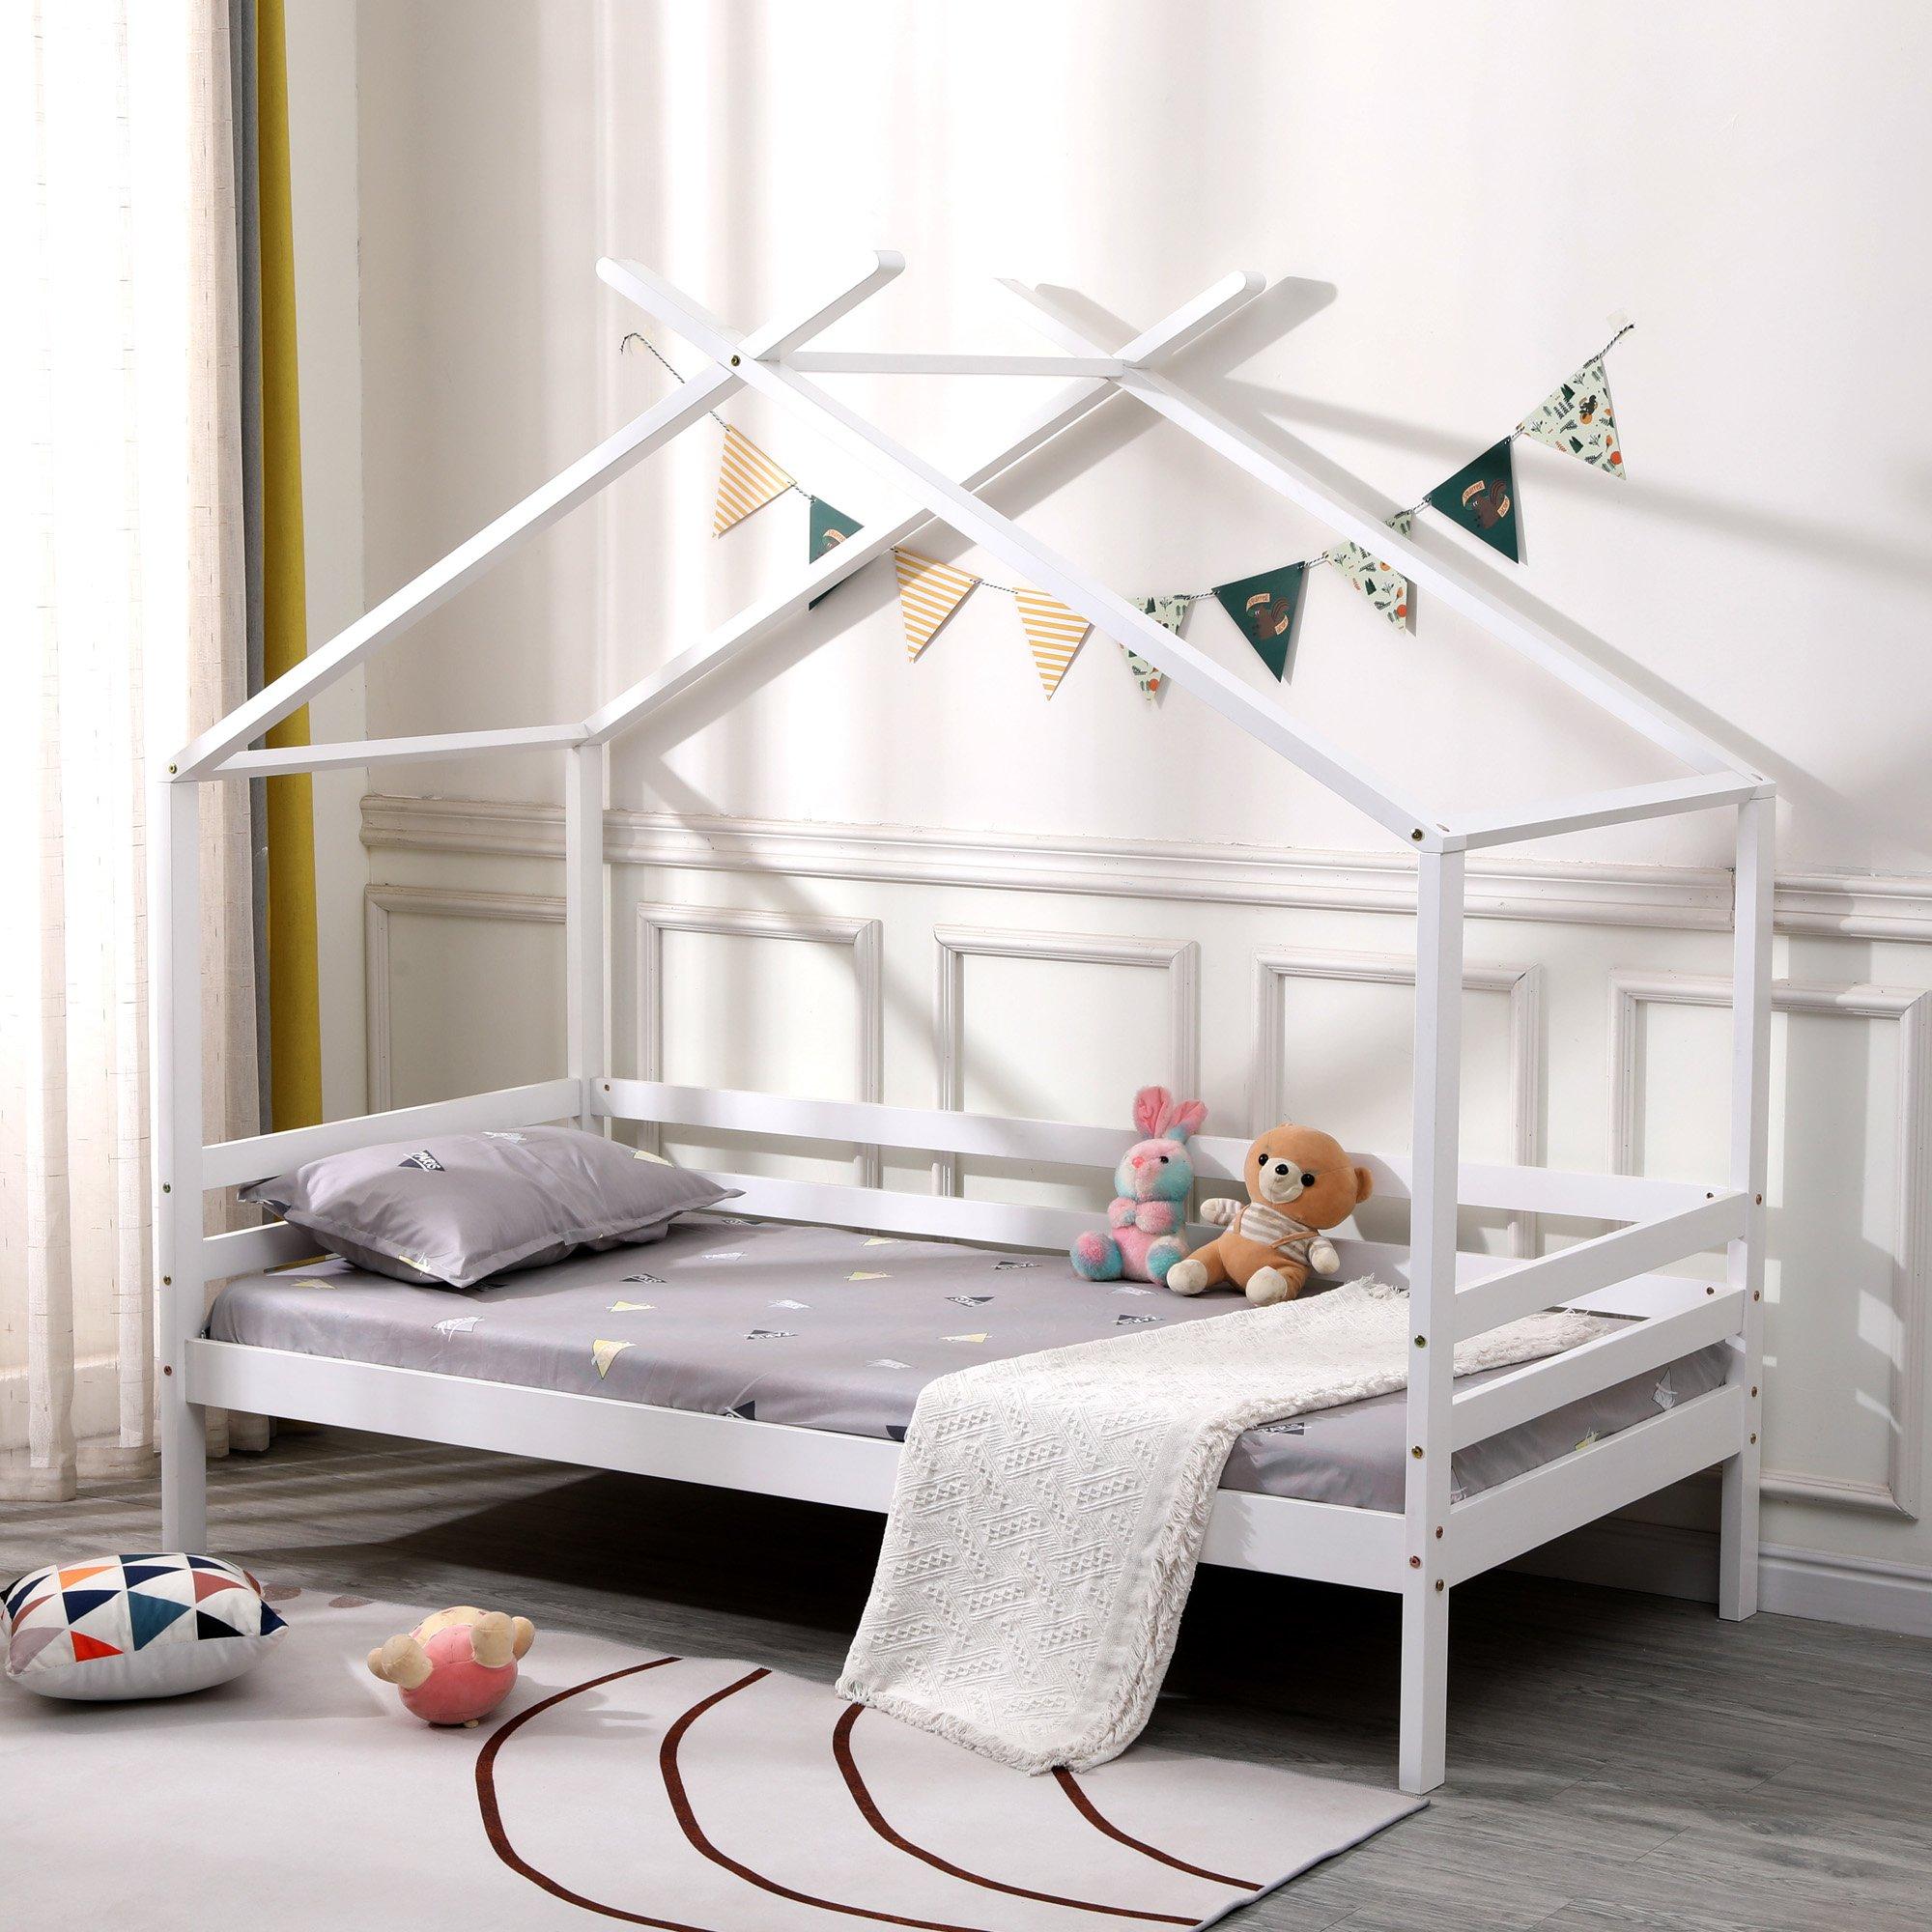 Teddy Kids Childrens Wooden House Treehouse Single Bed Frame